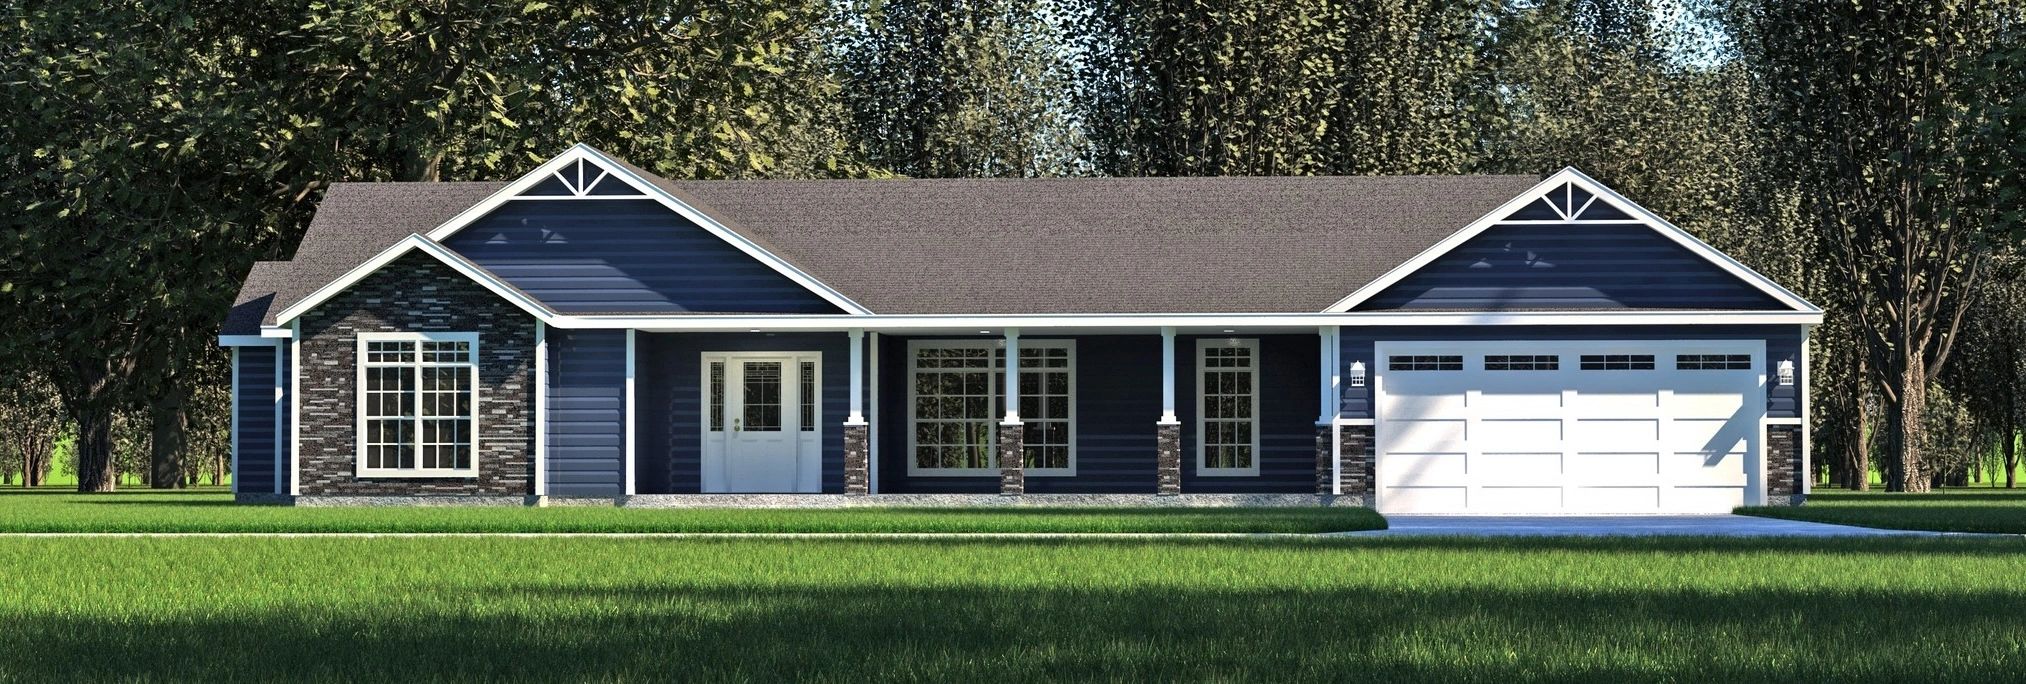 Modular Homes Indiana Manufactured Homes Indiana Modular Homes Prefab Homes Indiana